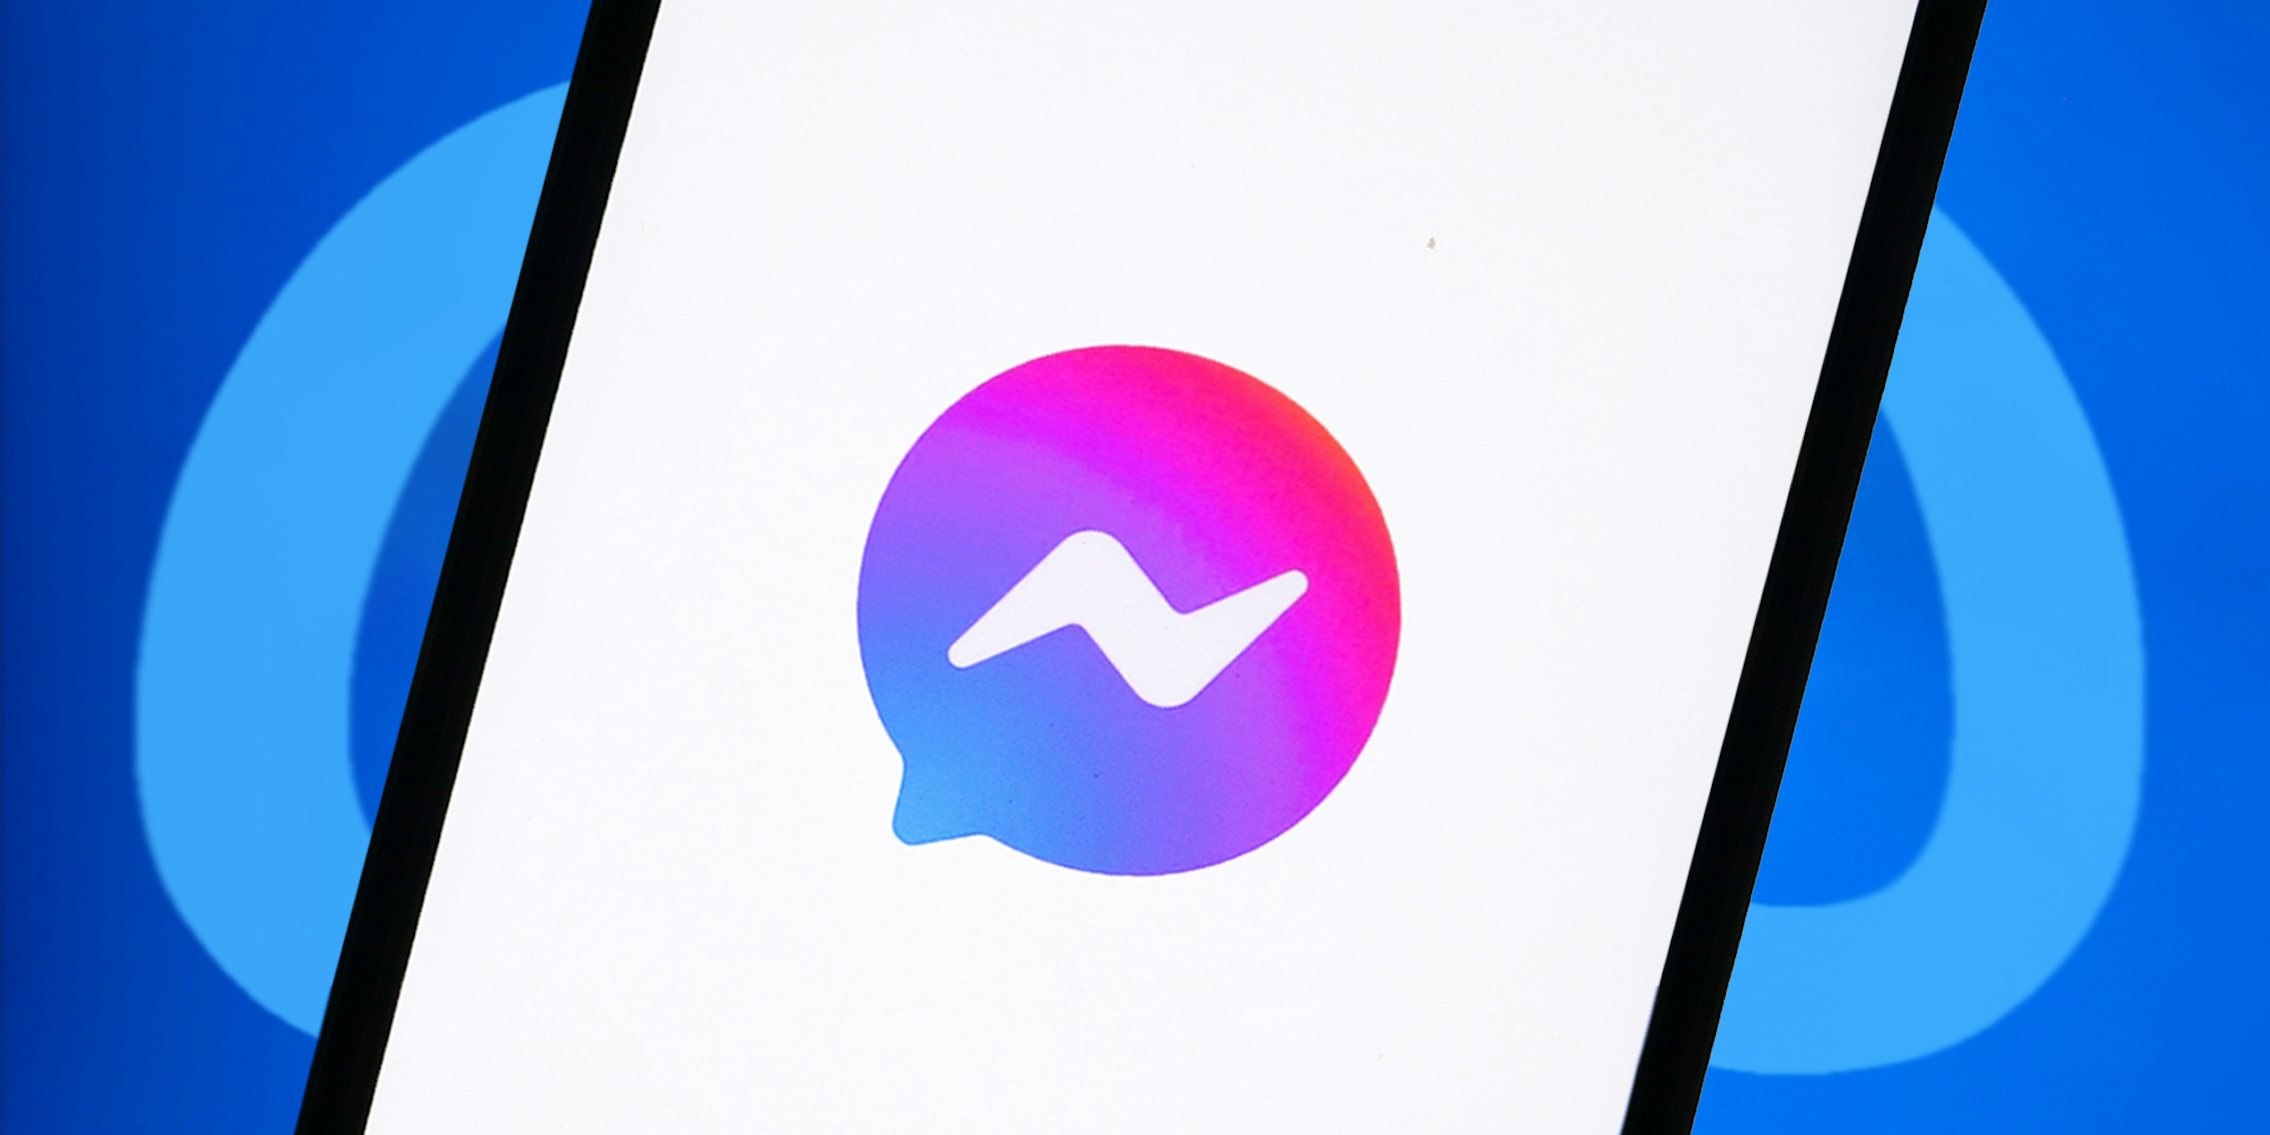 Facebook Messenger app opening on phone screen in front of blue Meta logo background